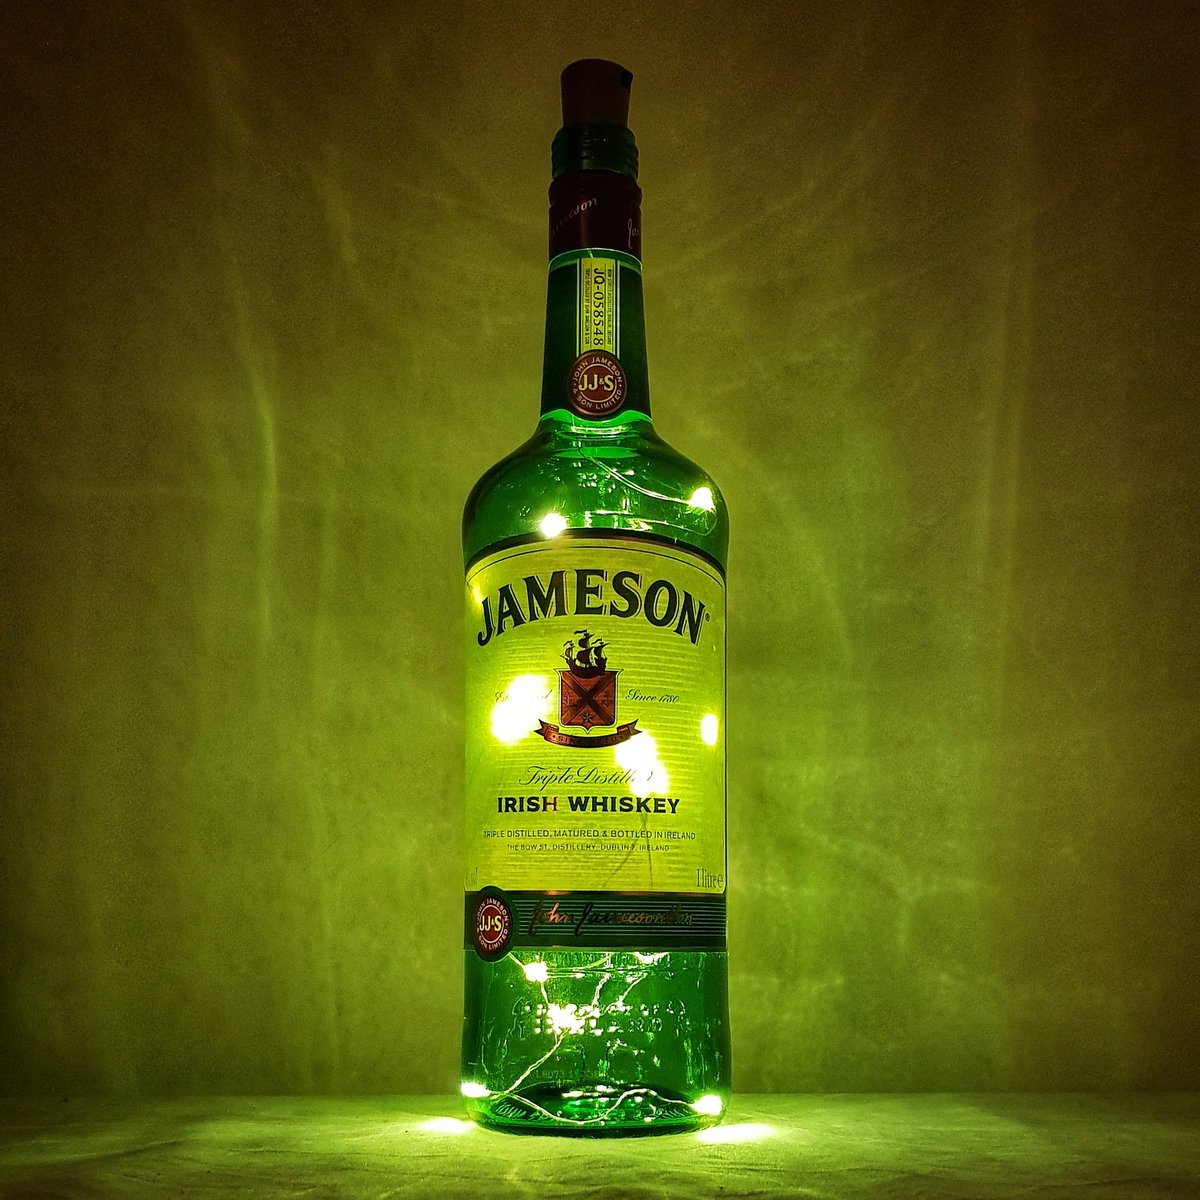 What do you do with your empty bottles?  Some bottles are just too interesting for the recycling bin. Why not buy some bottle lights and put them on display. #whiskyshared #whisky #whiskey #whiskybottle #jameson #monkeyshoulder #bottlelight